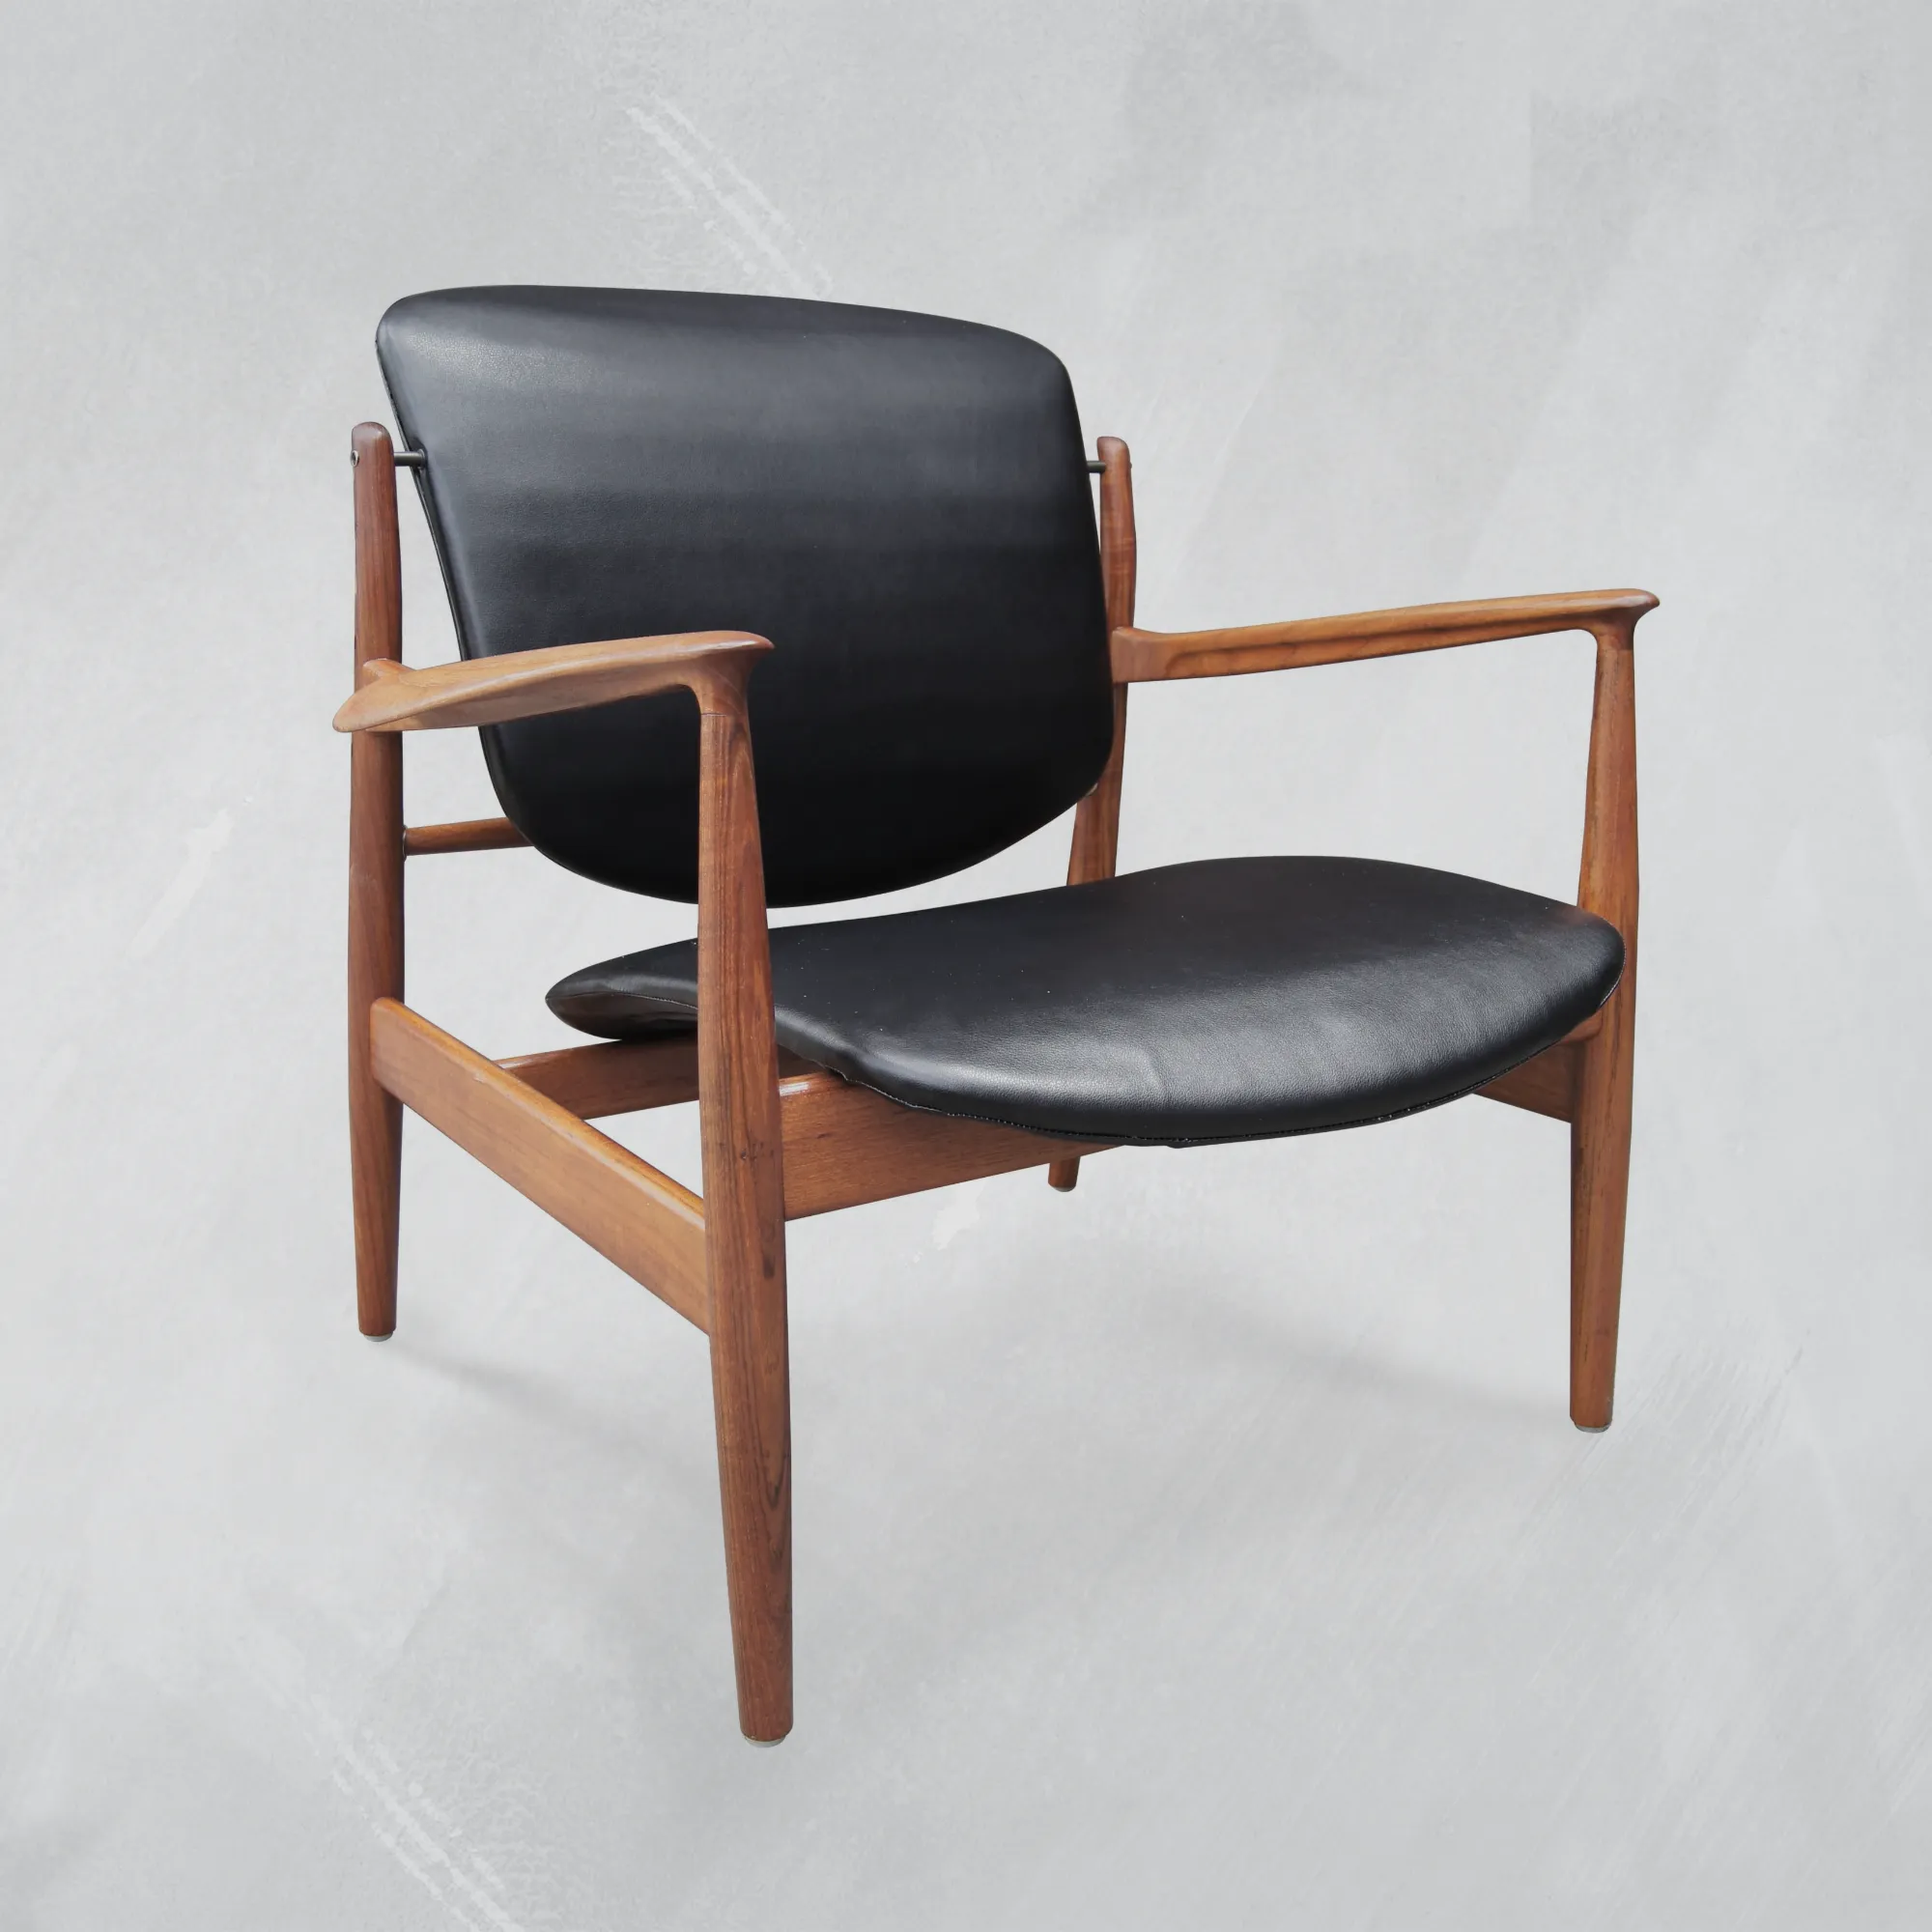 Finn Juhl France chair with black leather upholstery and oild walnut wood frame